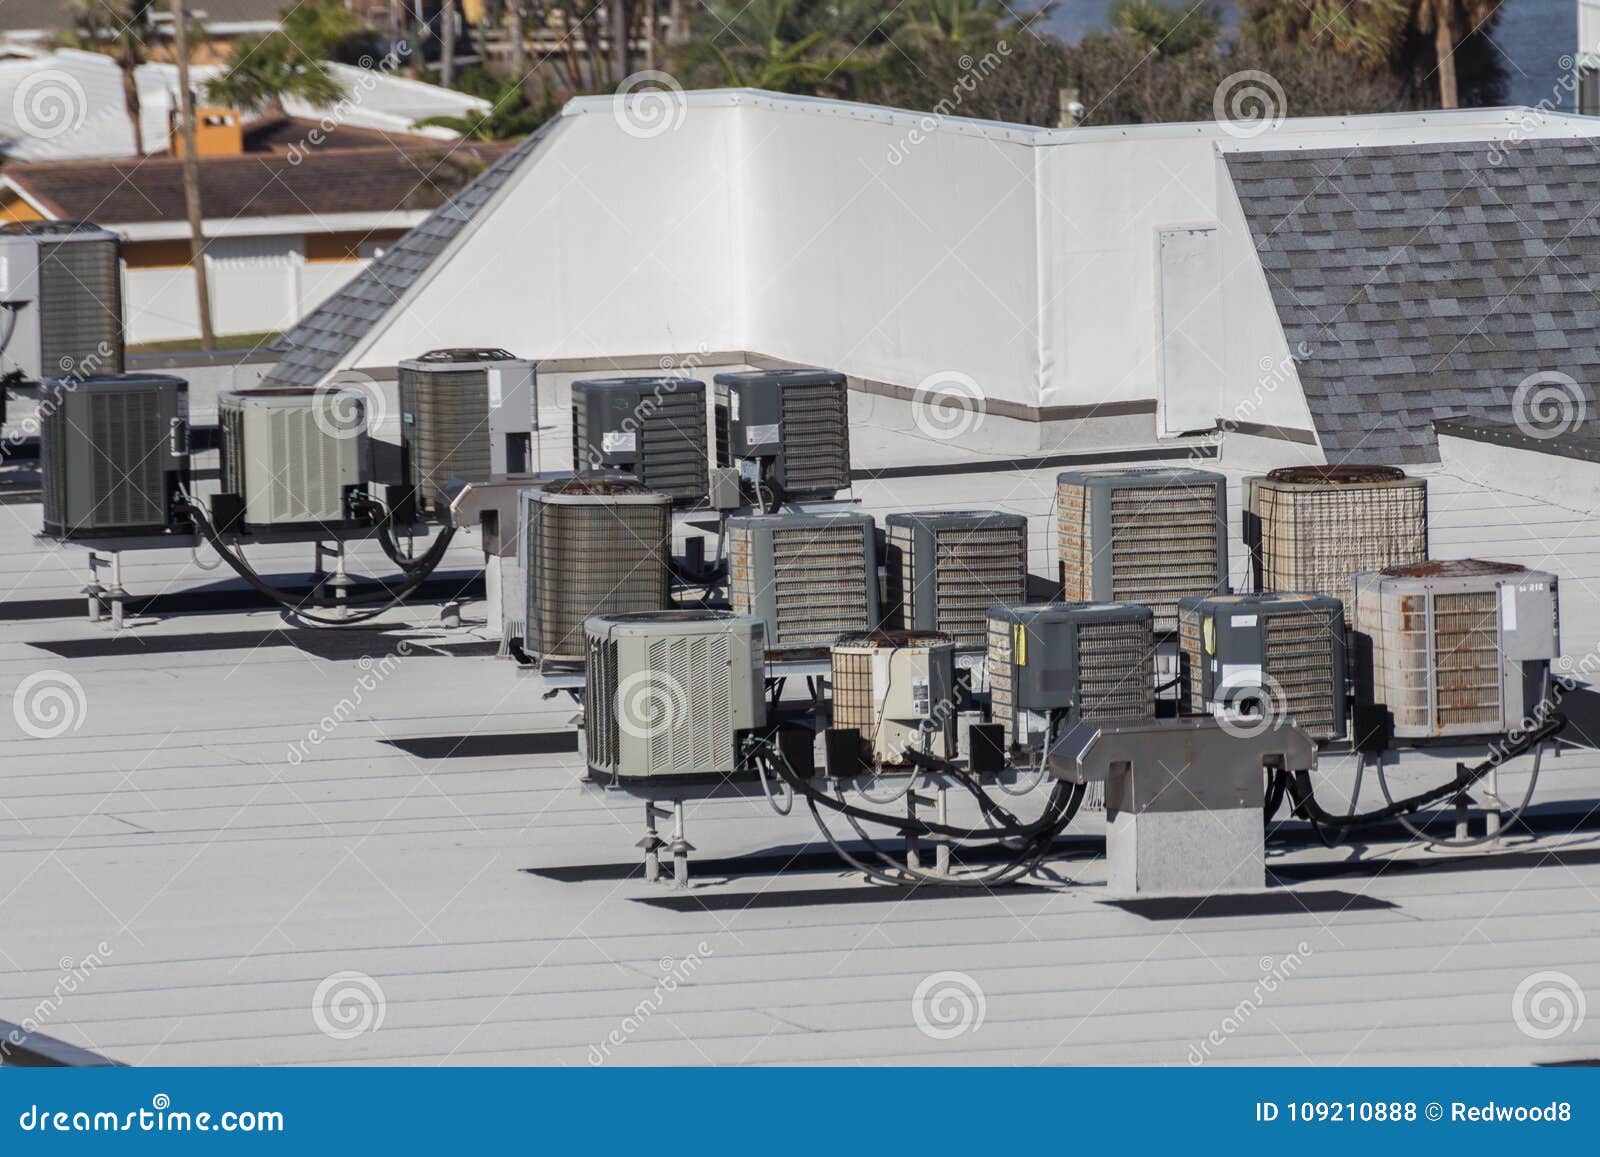 multiple rooftop air conditioning units